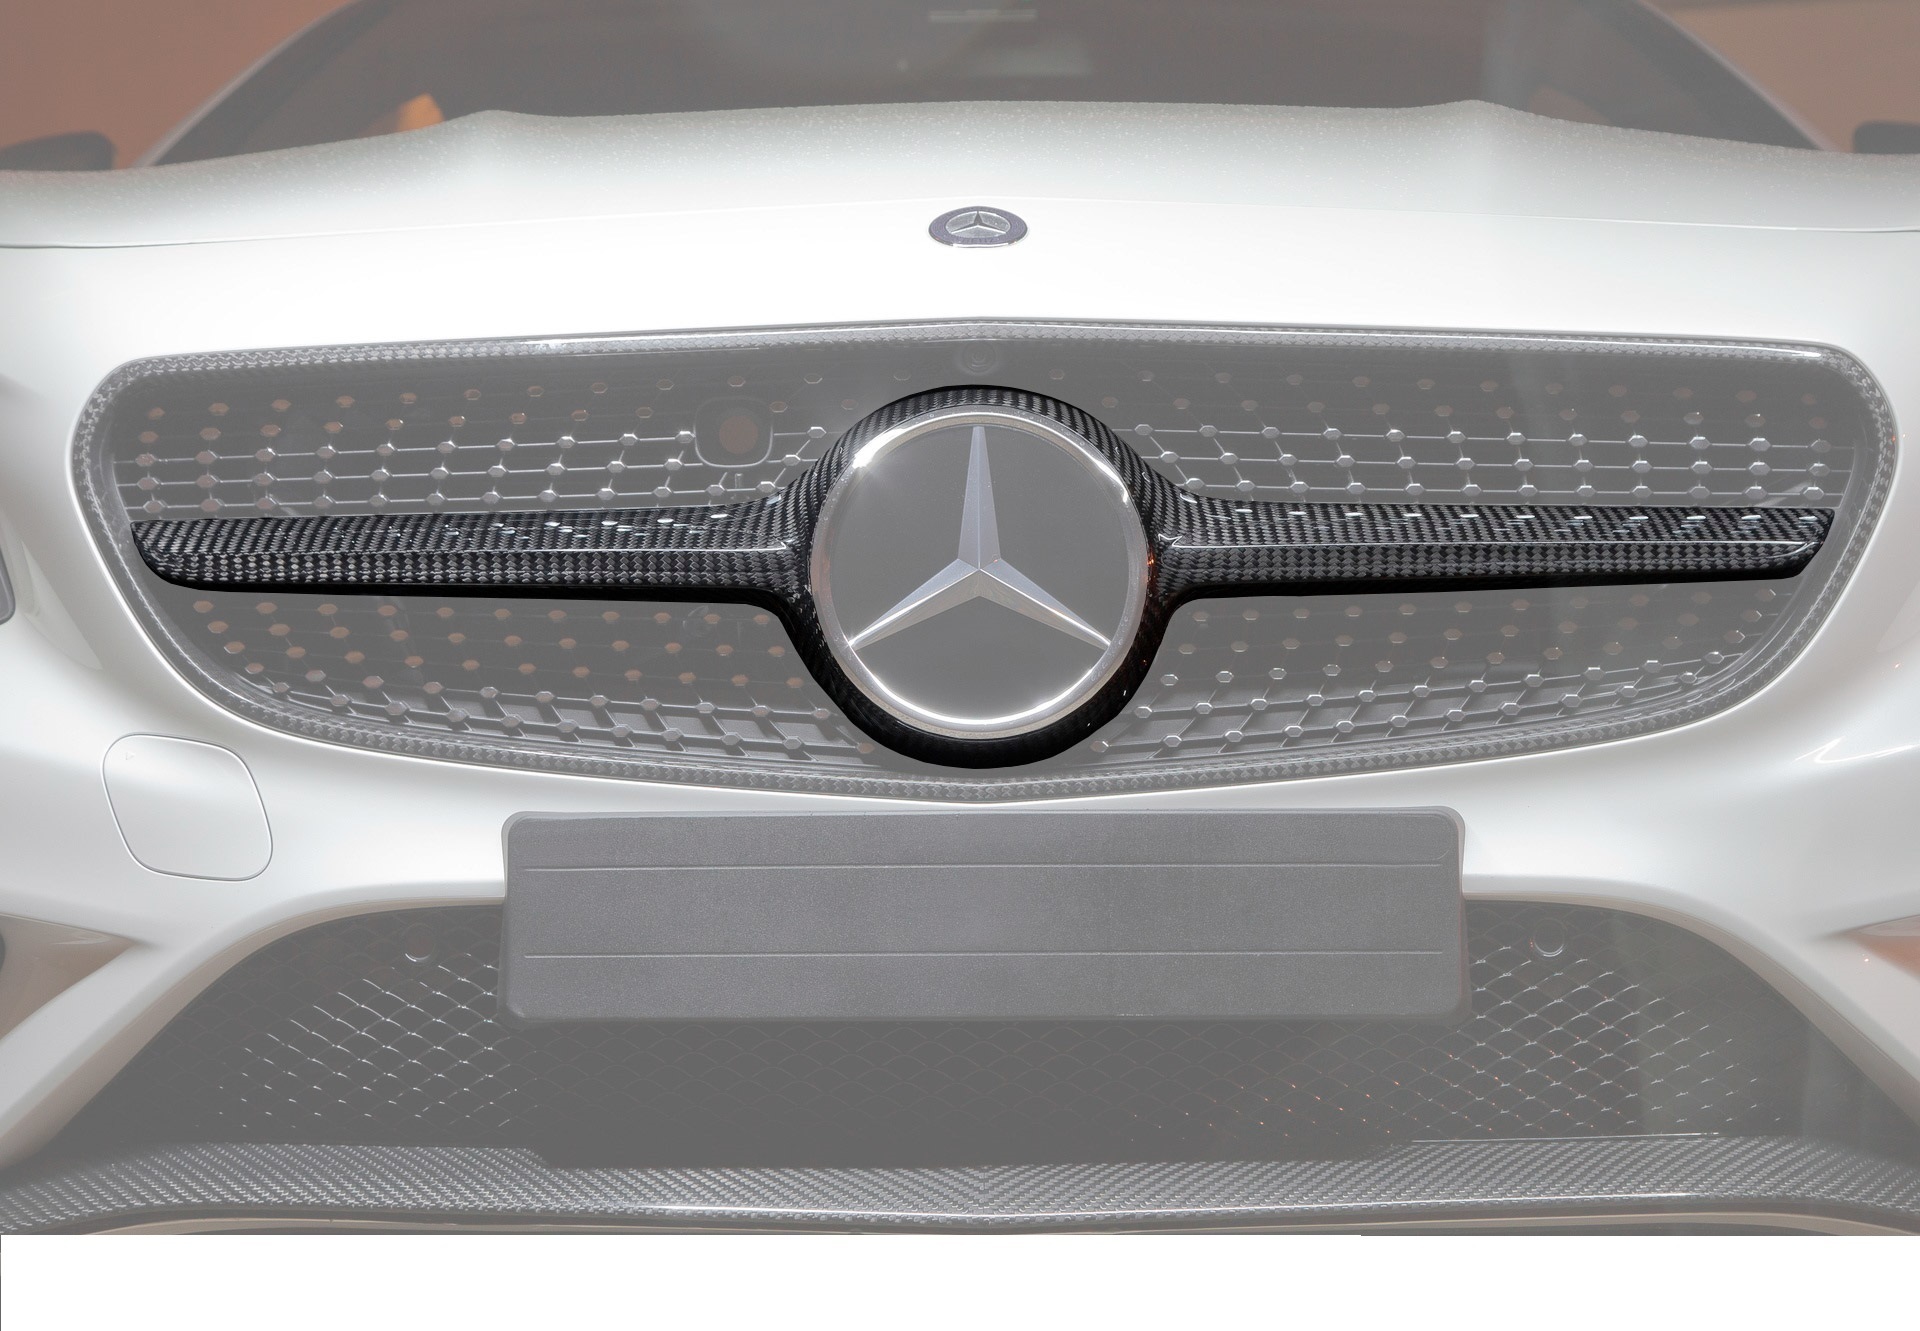 Hodoor Performance Carbon fiber grille 63 AMG Style for Mercedes S-class coupe C217